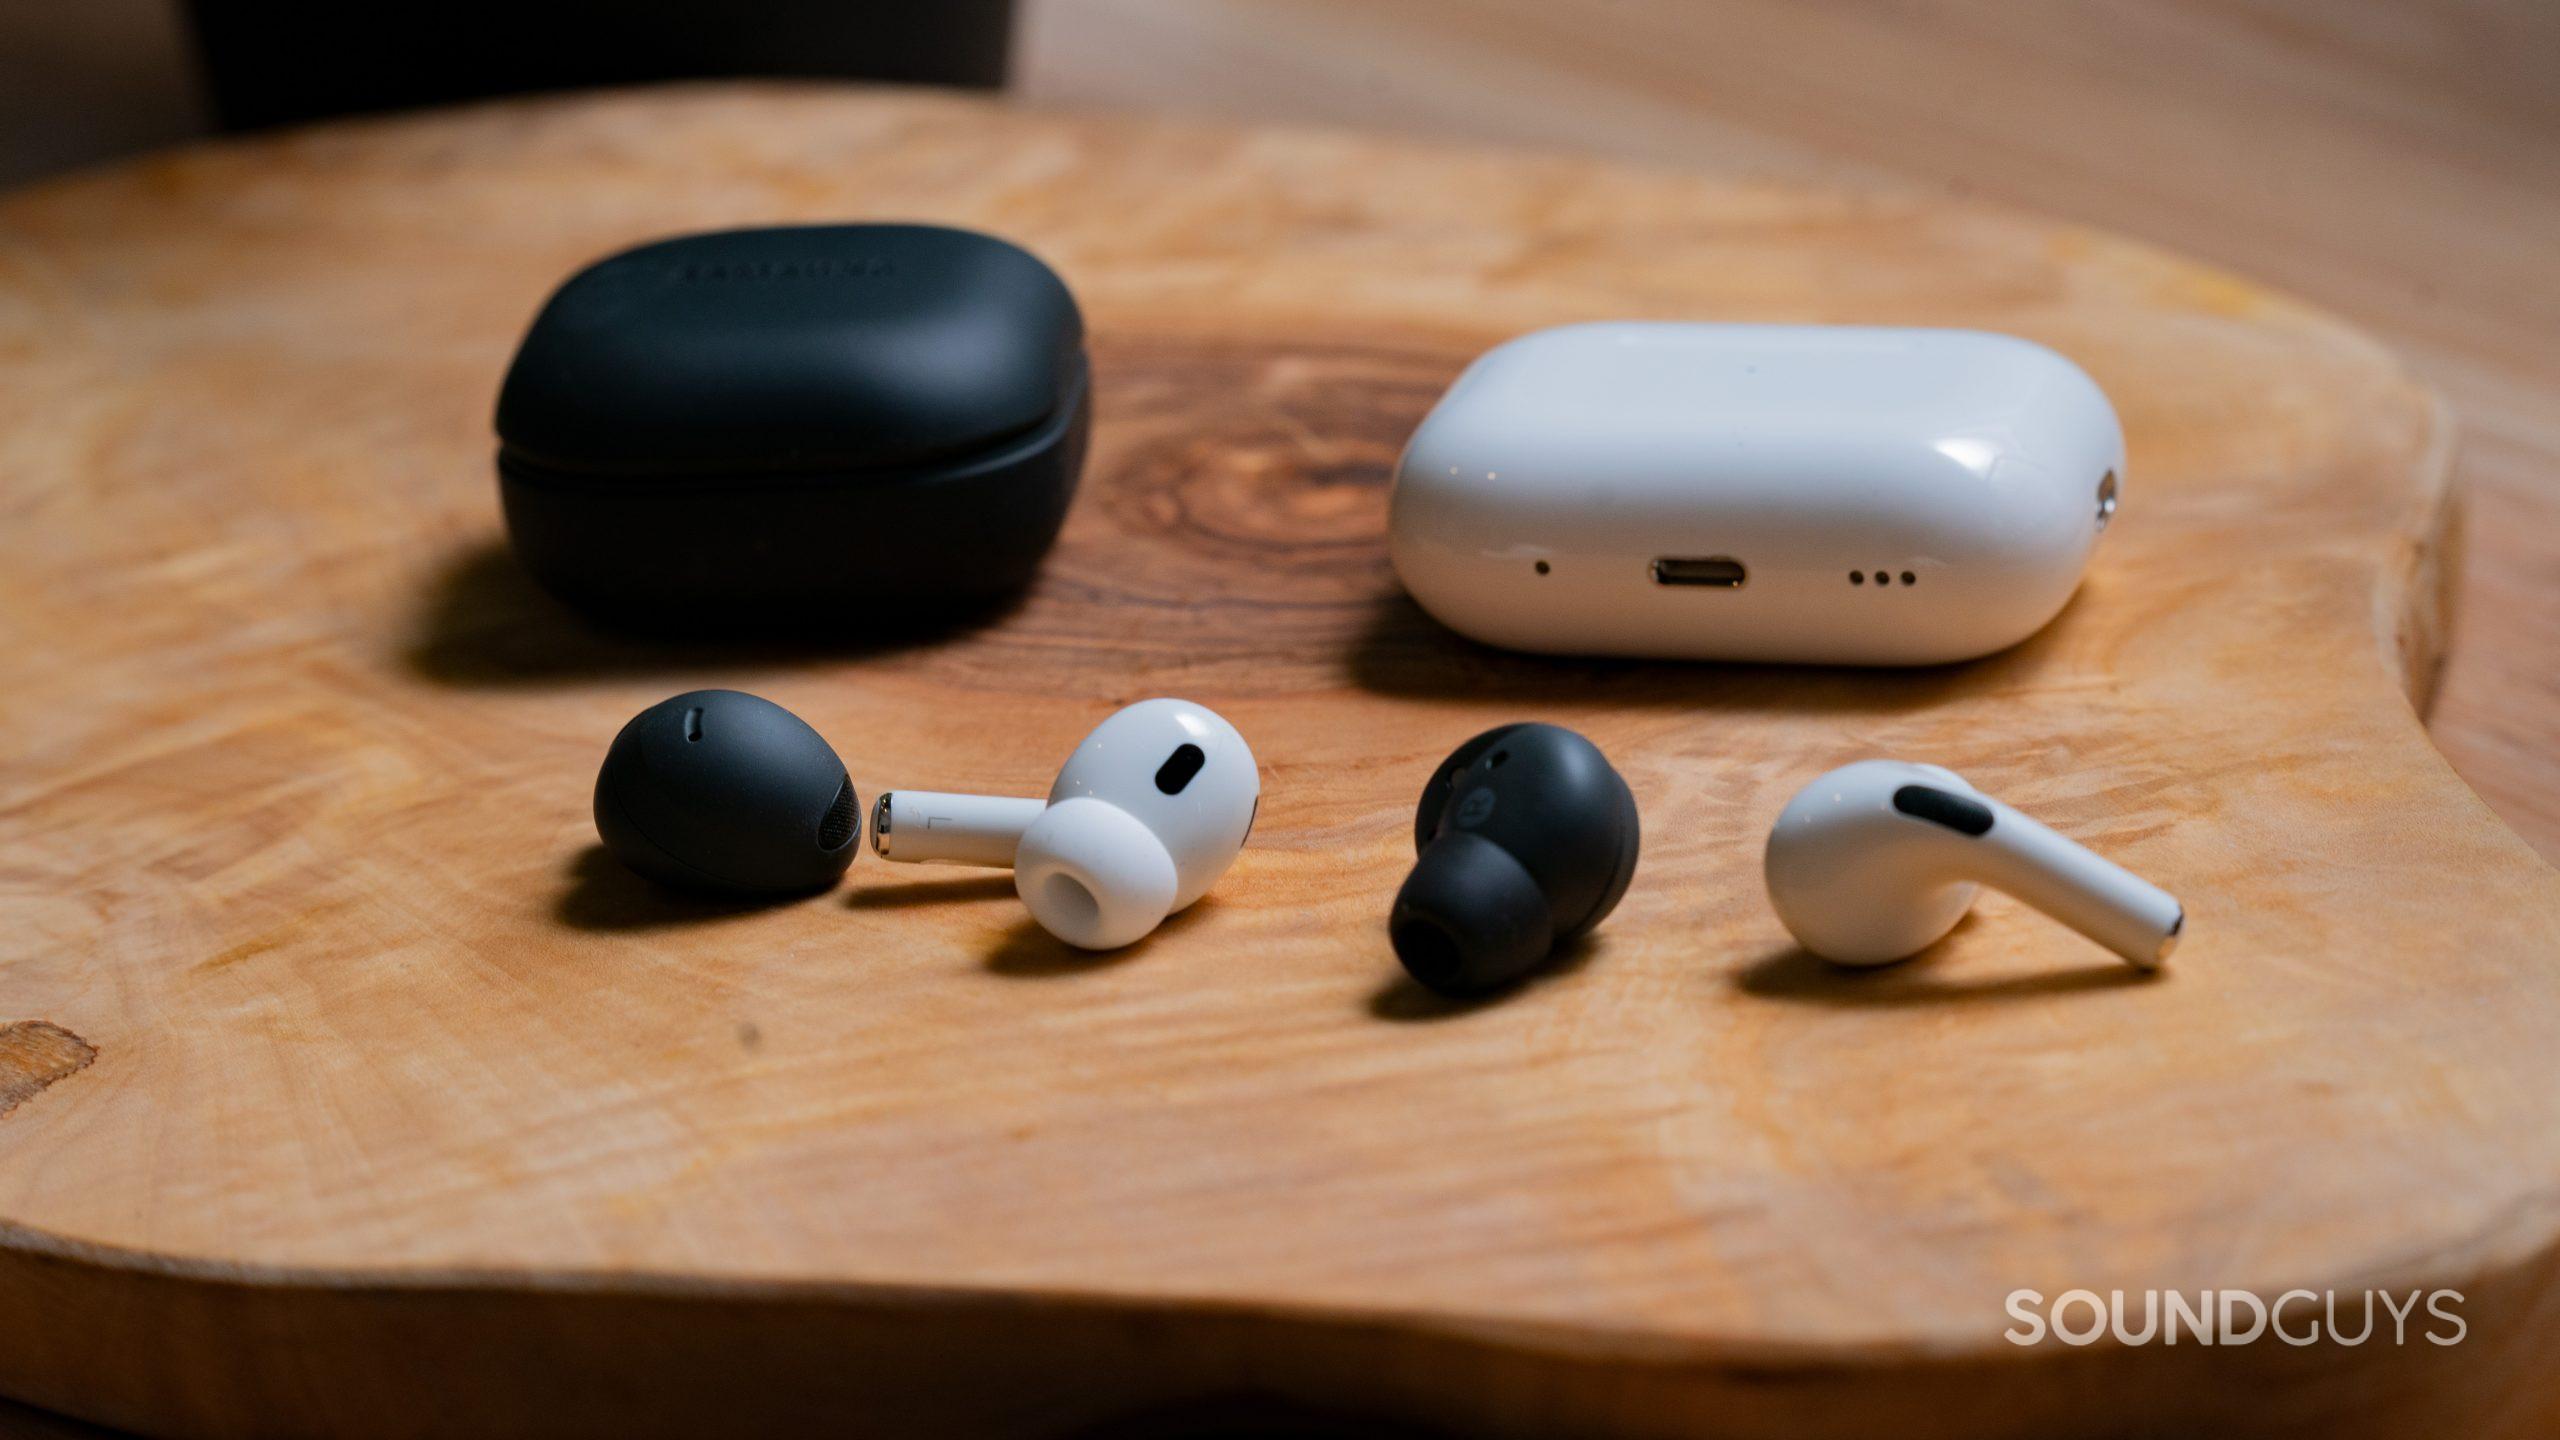 The Samsung Galaxy Buds 2 Pro sits next to the Apple AirPods Pro (2nd generation) with the buds next to each other to show the differences.